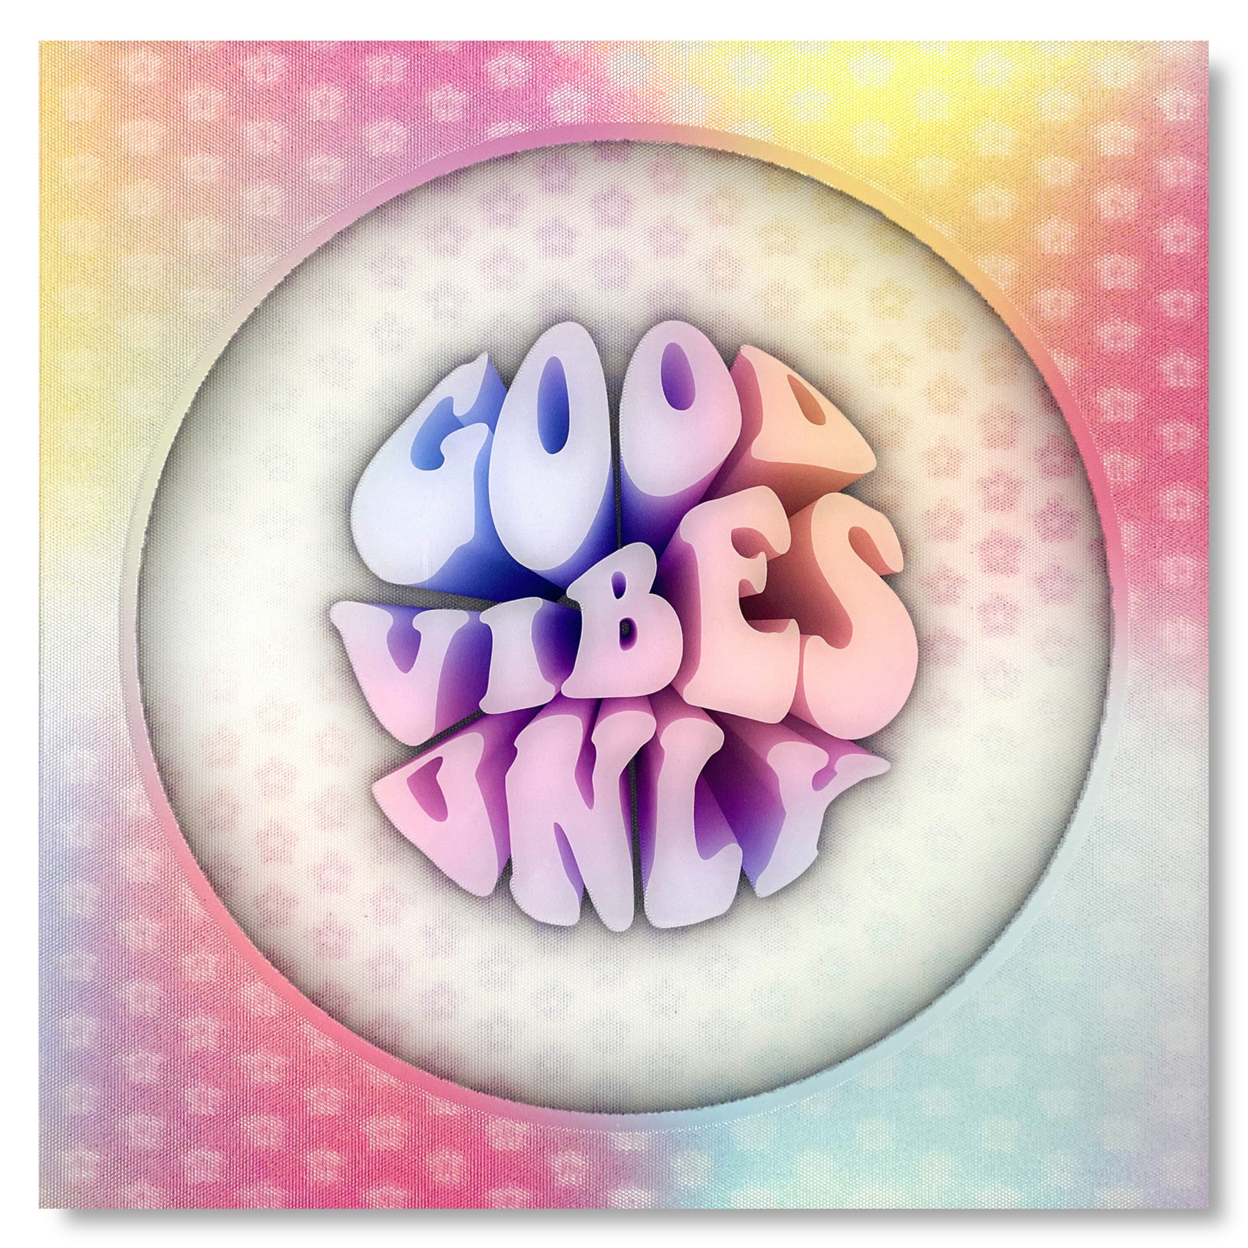 5D Multi-Dimensional Wall Art - Custom Made Good Vibes Wall Art Print On Strong Polycarbonate Panel W/ Vibrant Colors By Matashi (12x12 In)